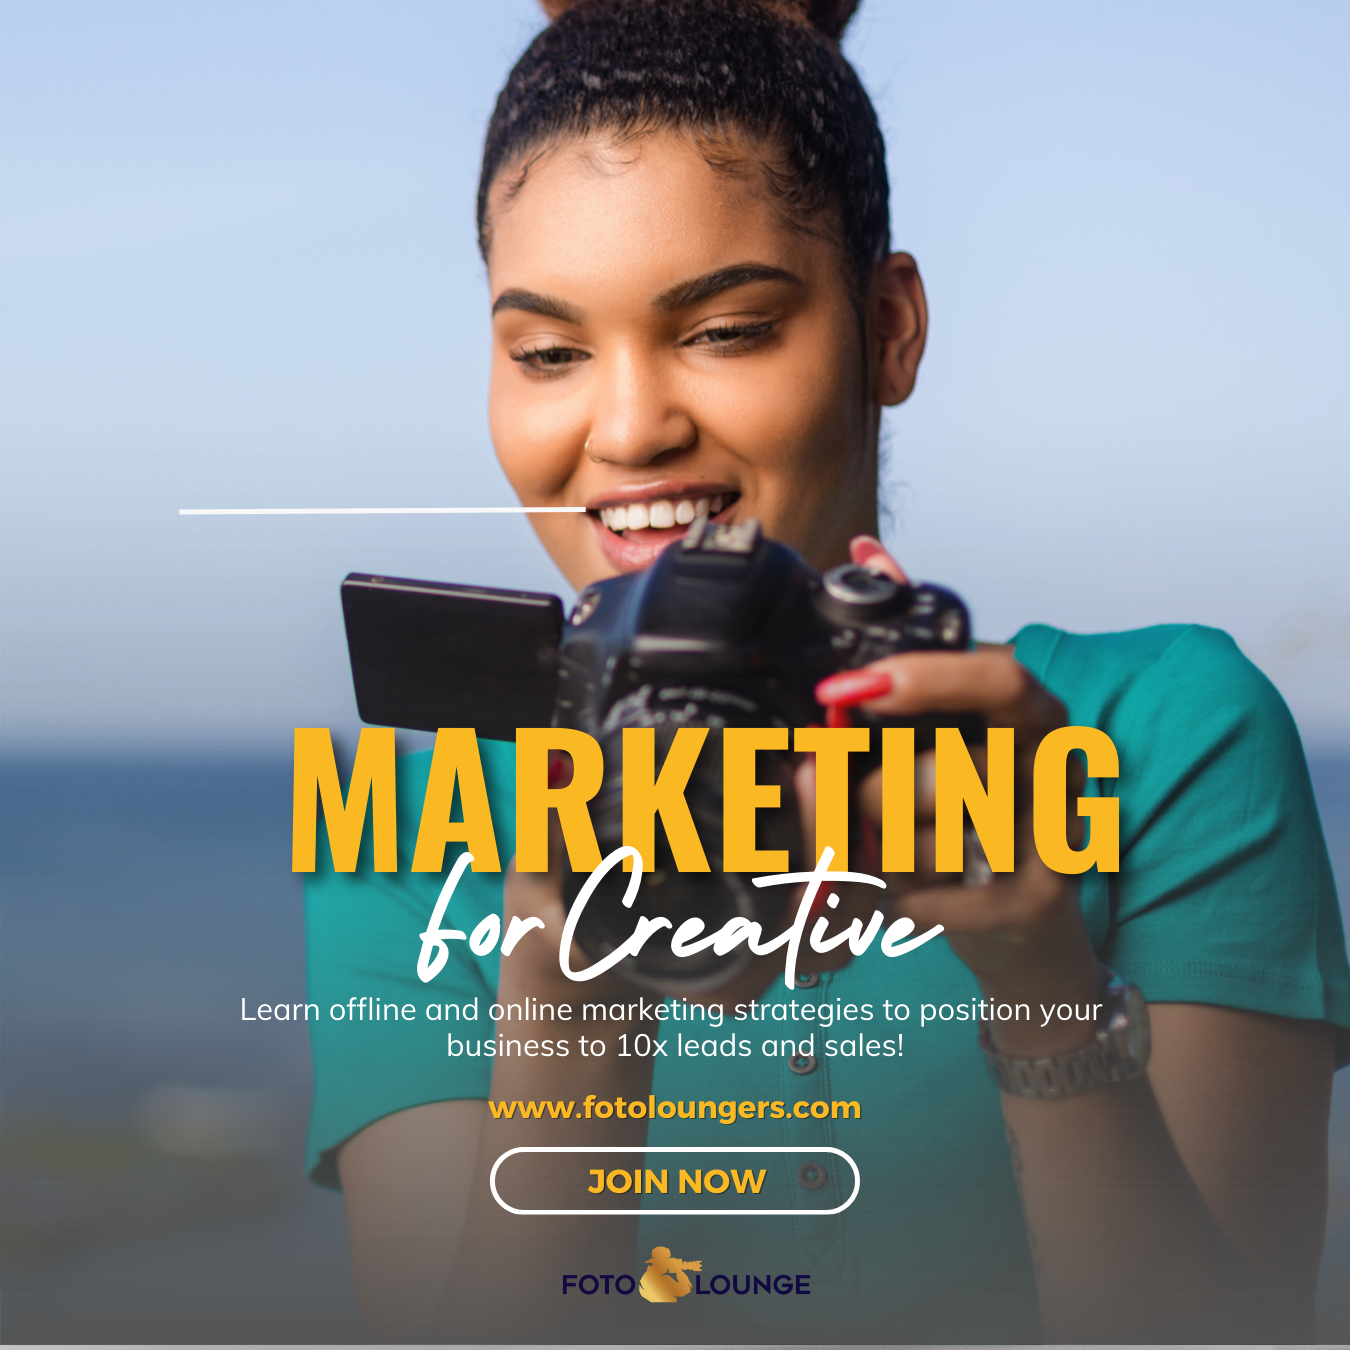 Marketing for creatives. Let more people know you